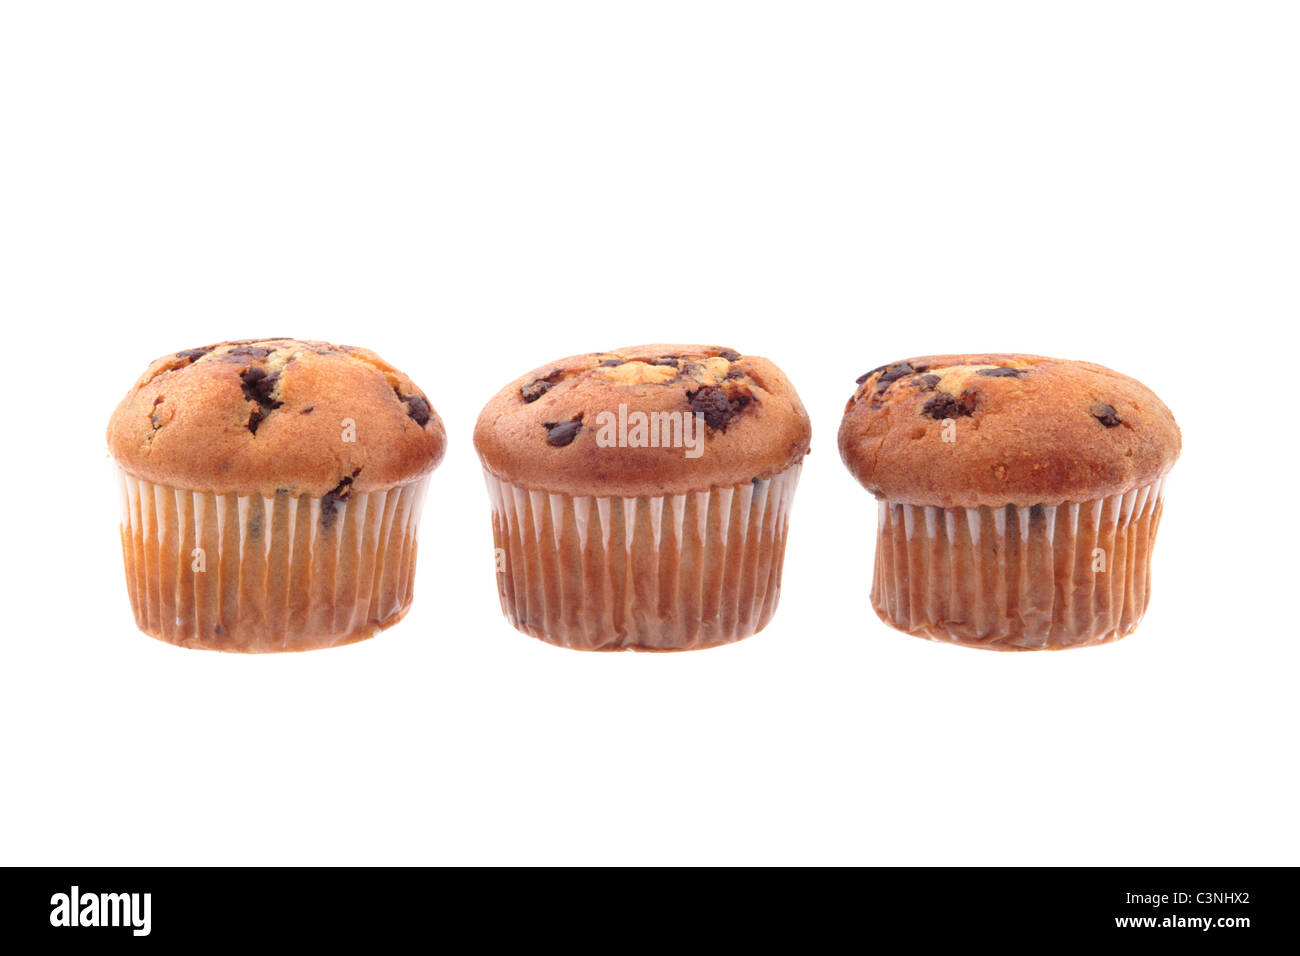 Three chocolate muffins in a line isolated on a white background. Stock Photo